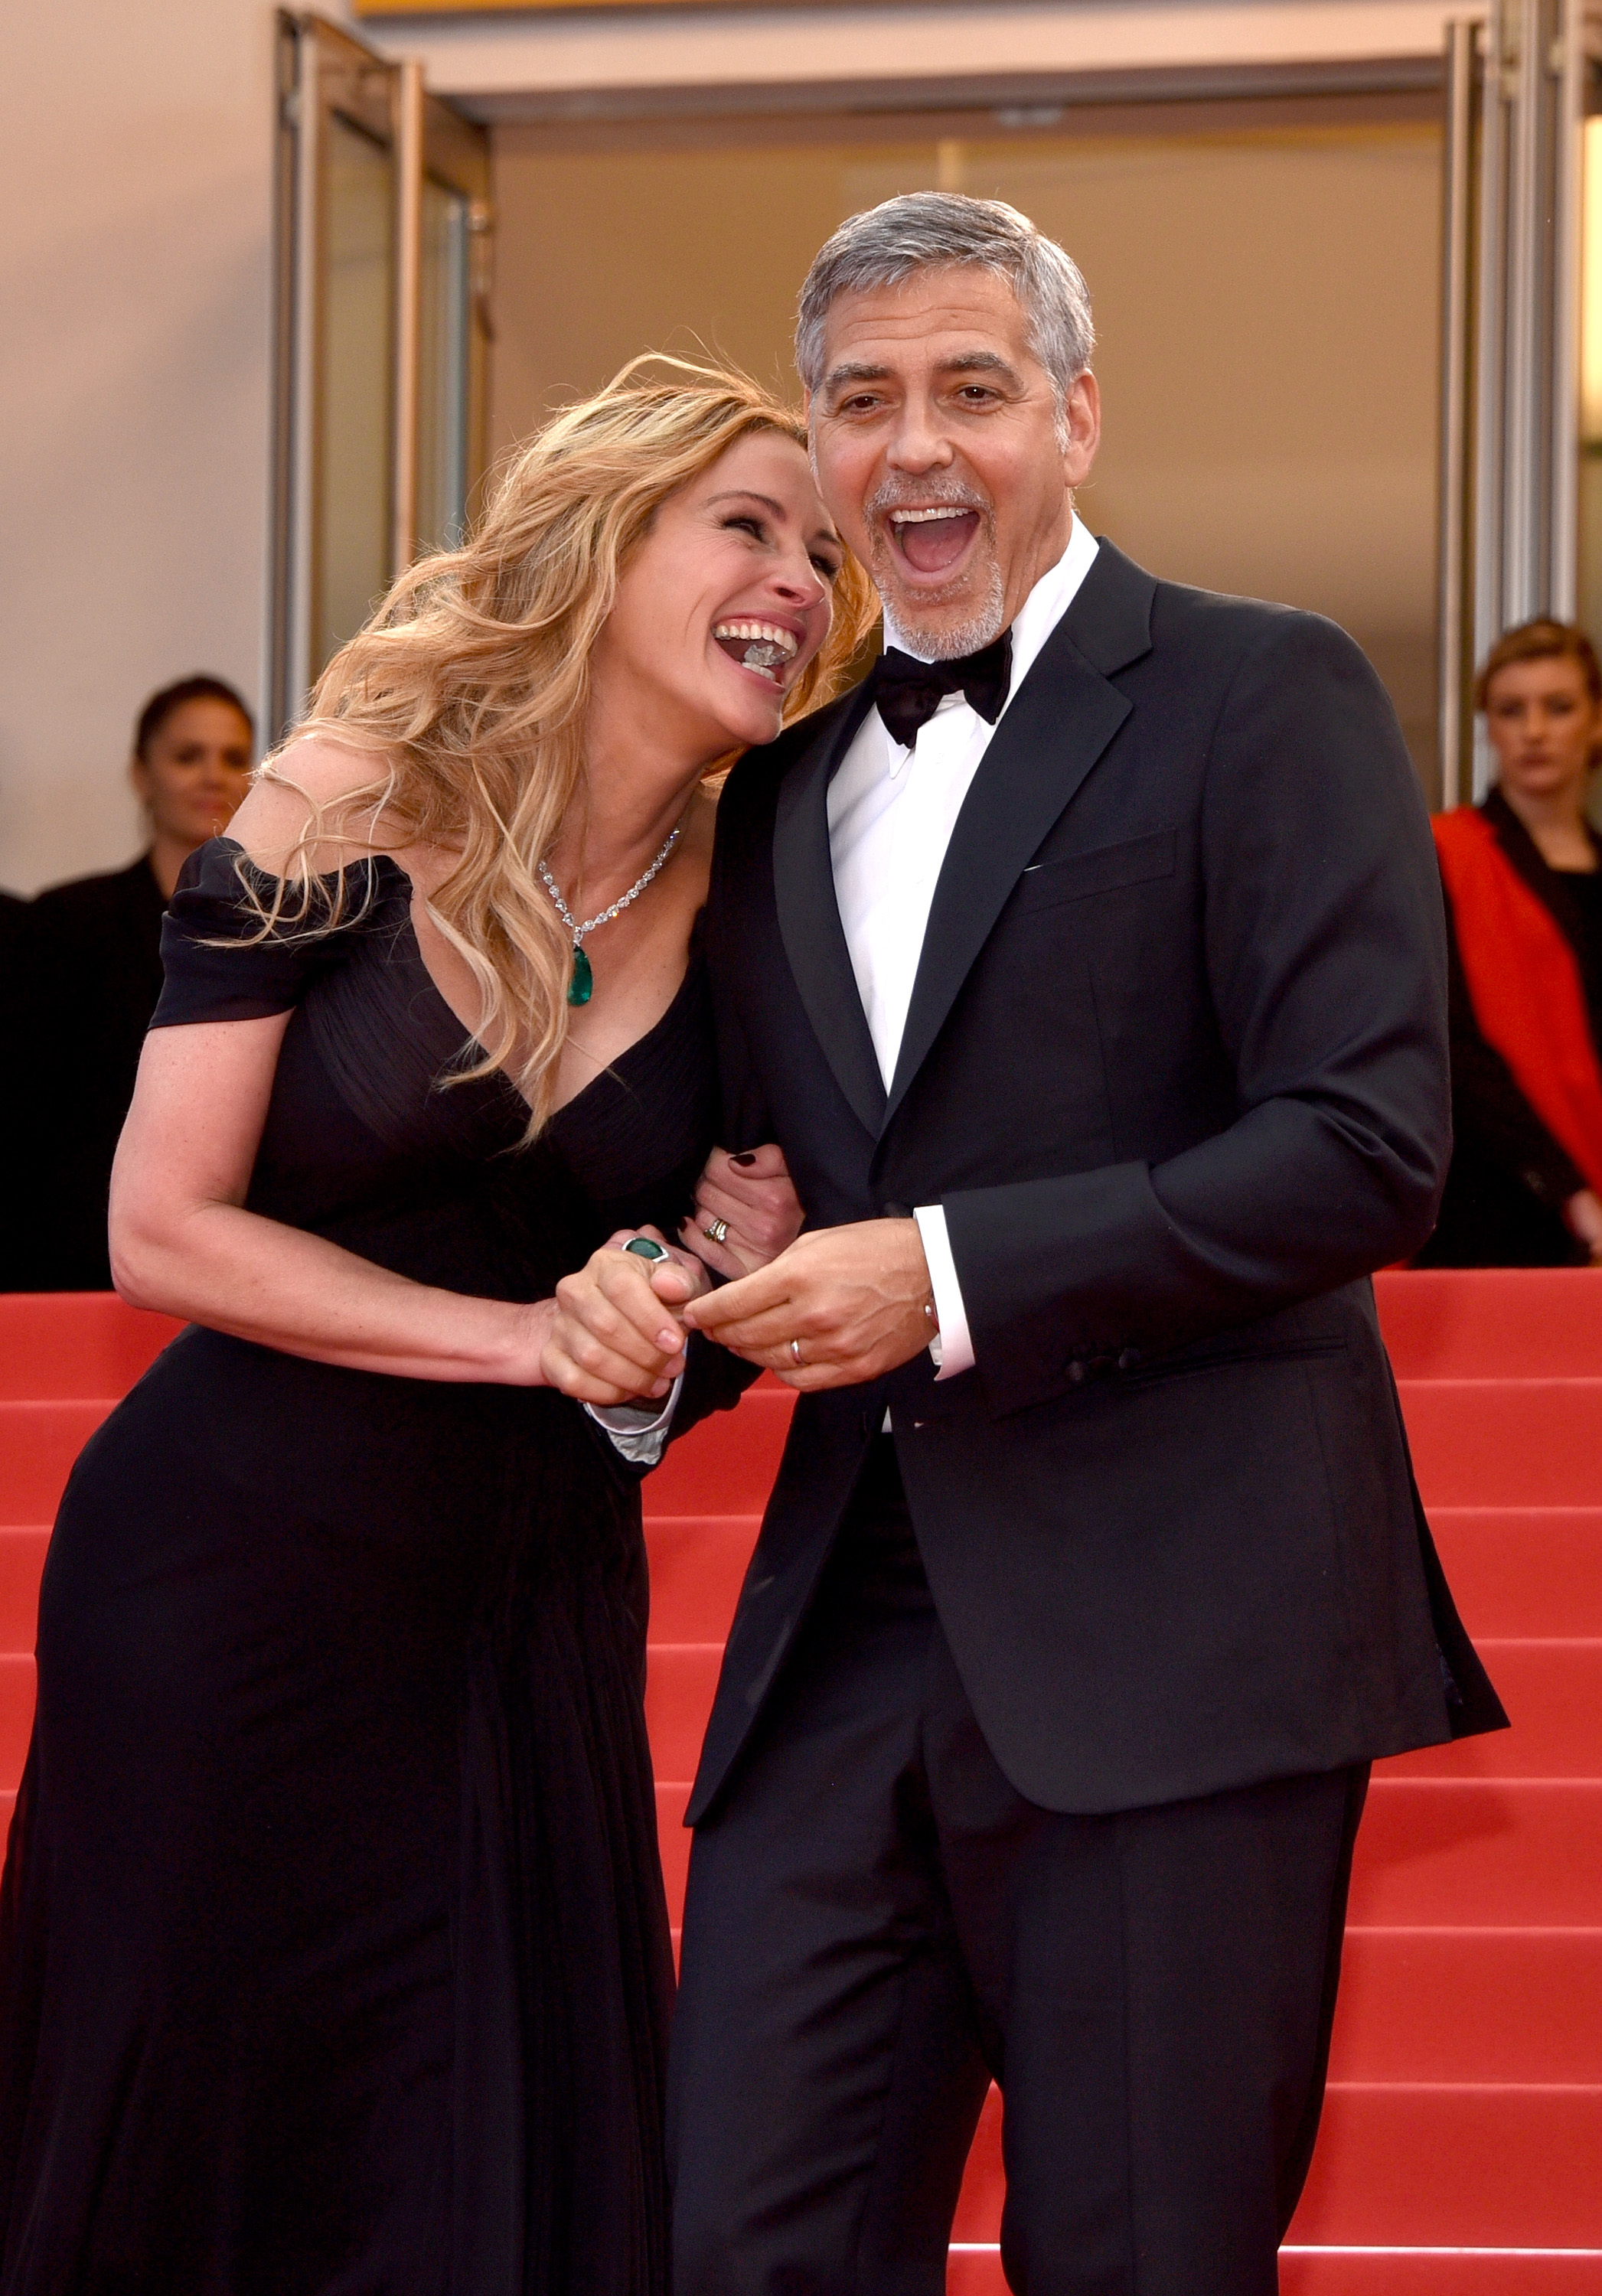 Julia Roberts and George Clooney 69th Cannes